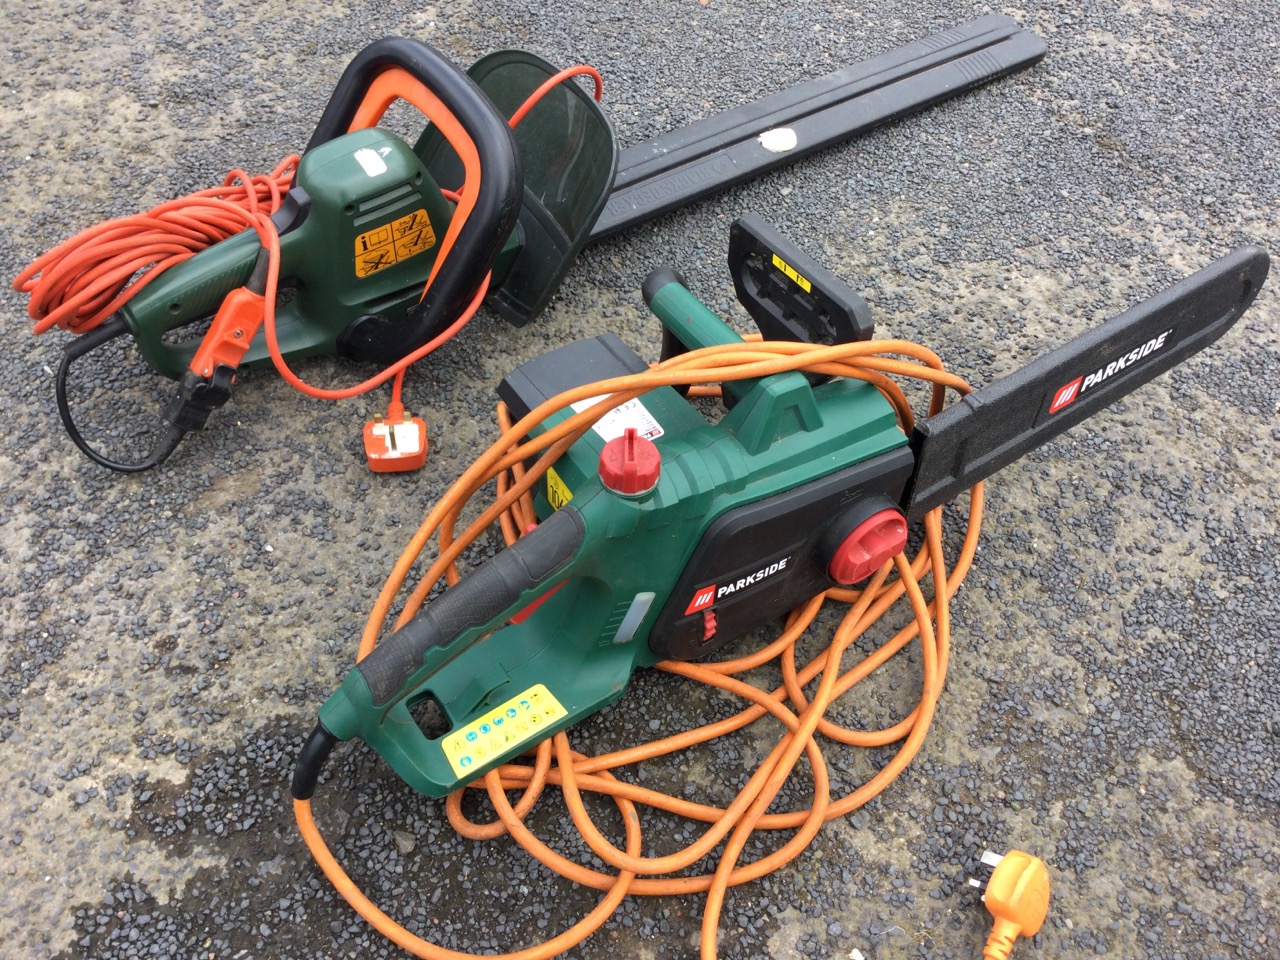 A Black & Decker 500w electric hedgecutter with long cable; and a Parkside electric chainsaw. (2) - Image 2 of 3